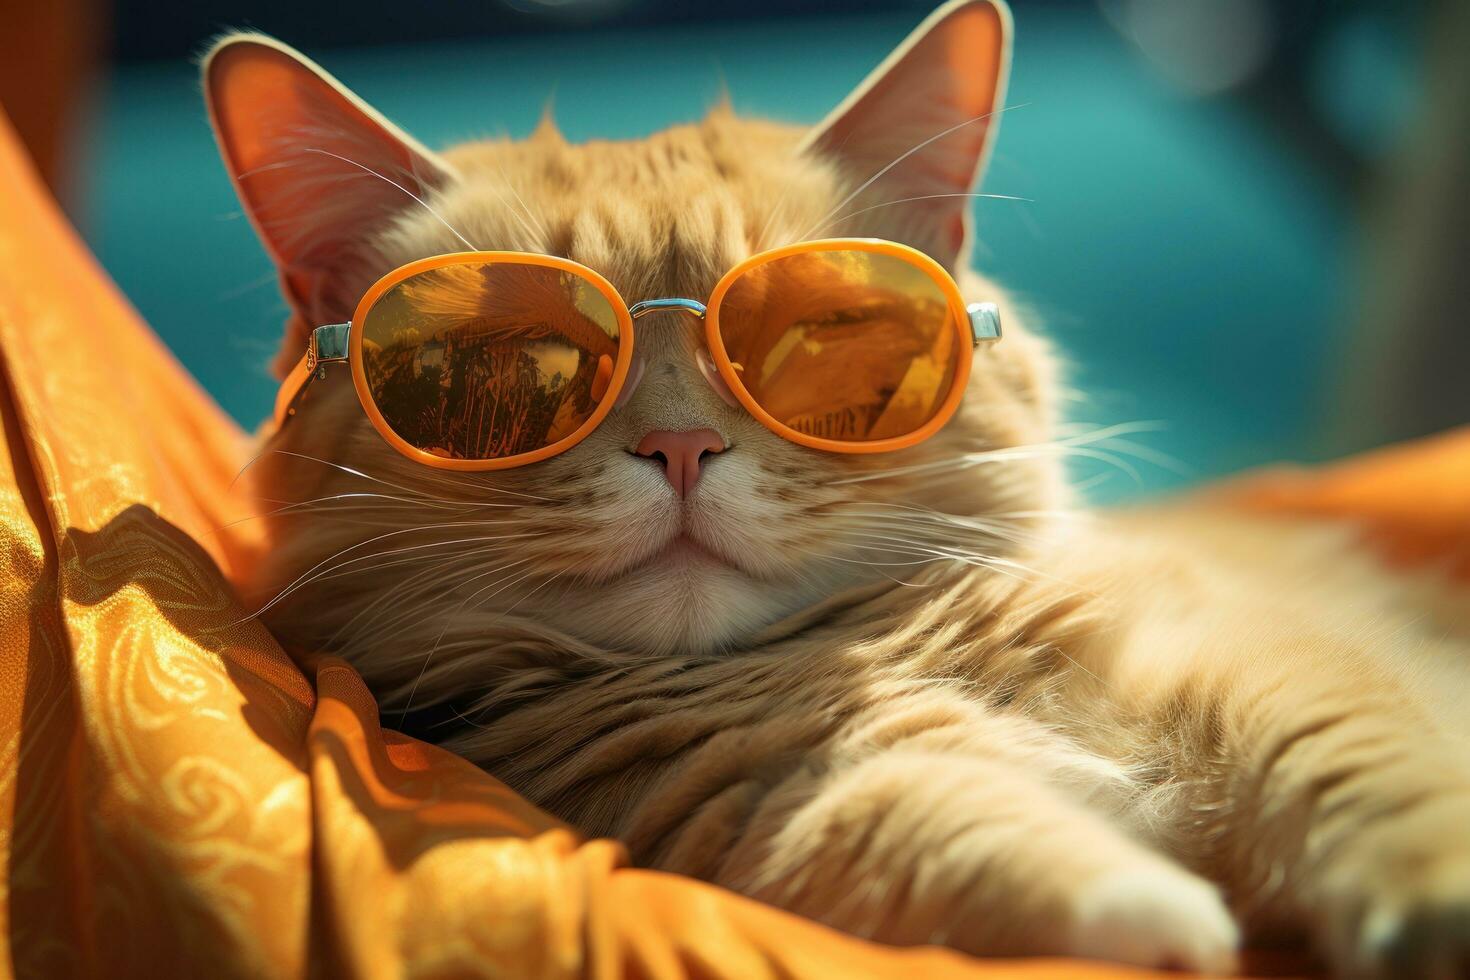 AI generated a cat dressed up in sunglasses is sleeping in a hammock, photo